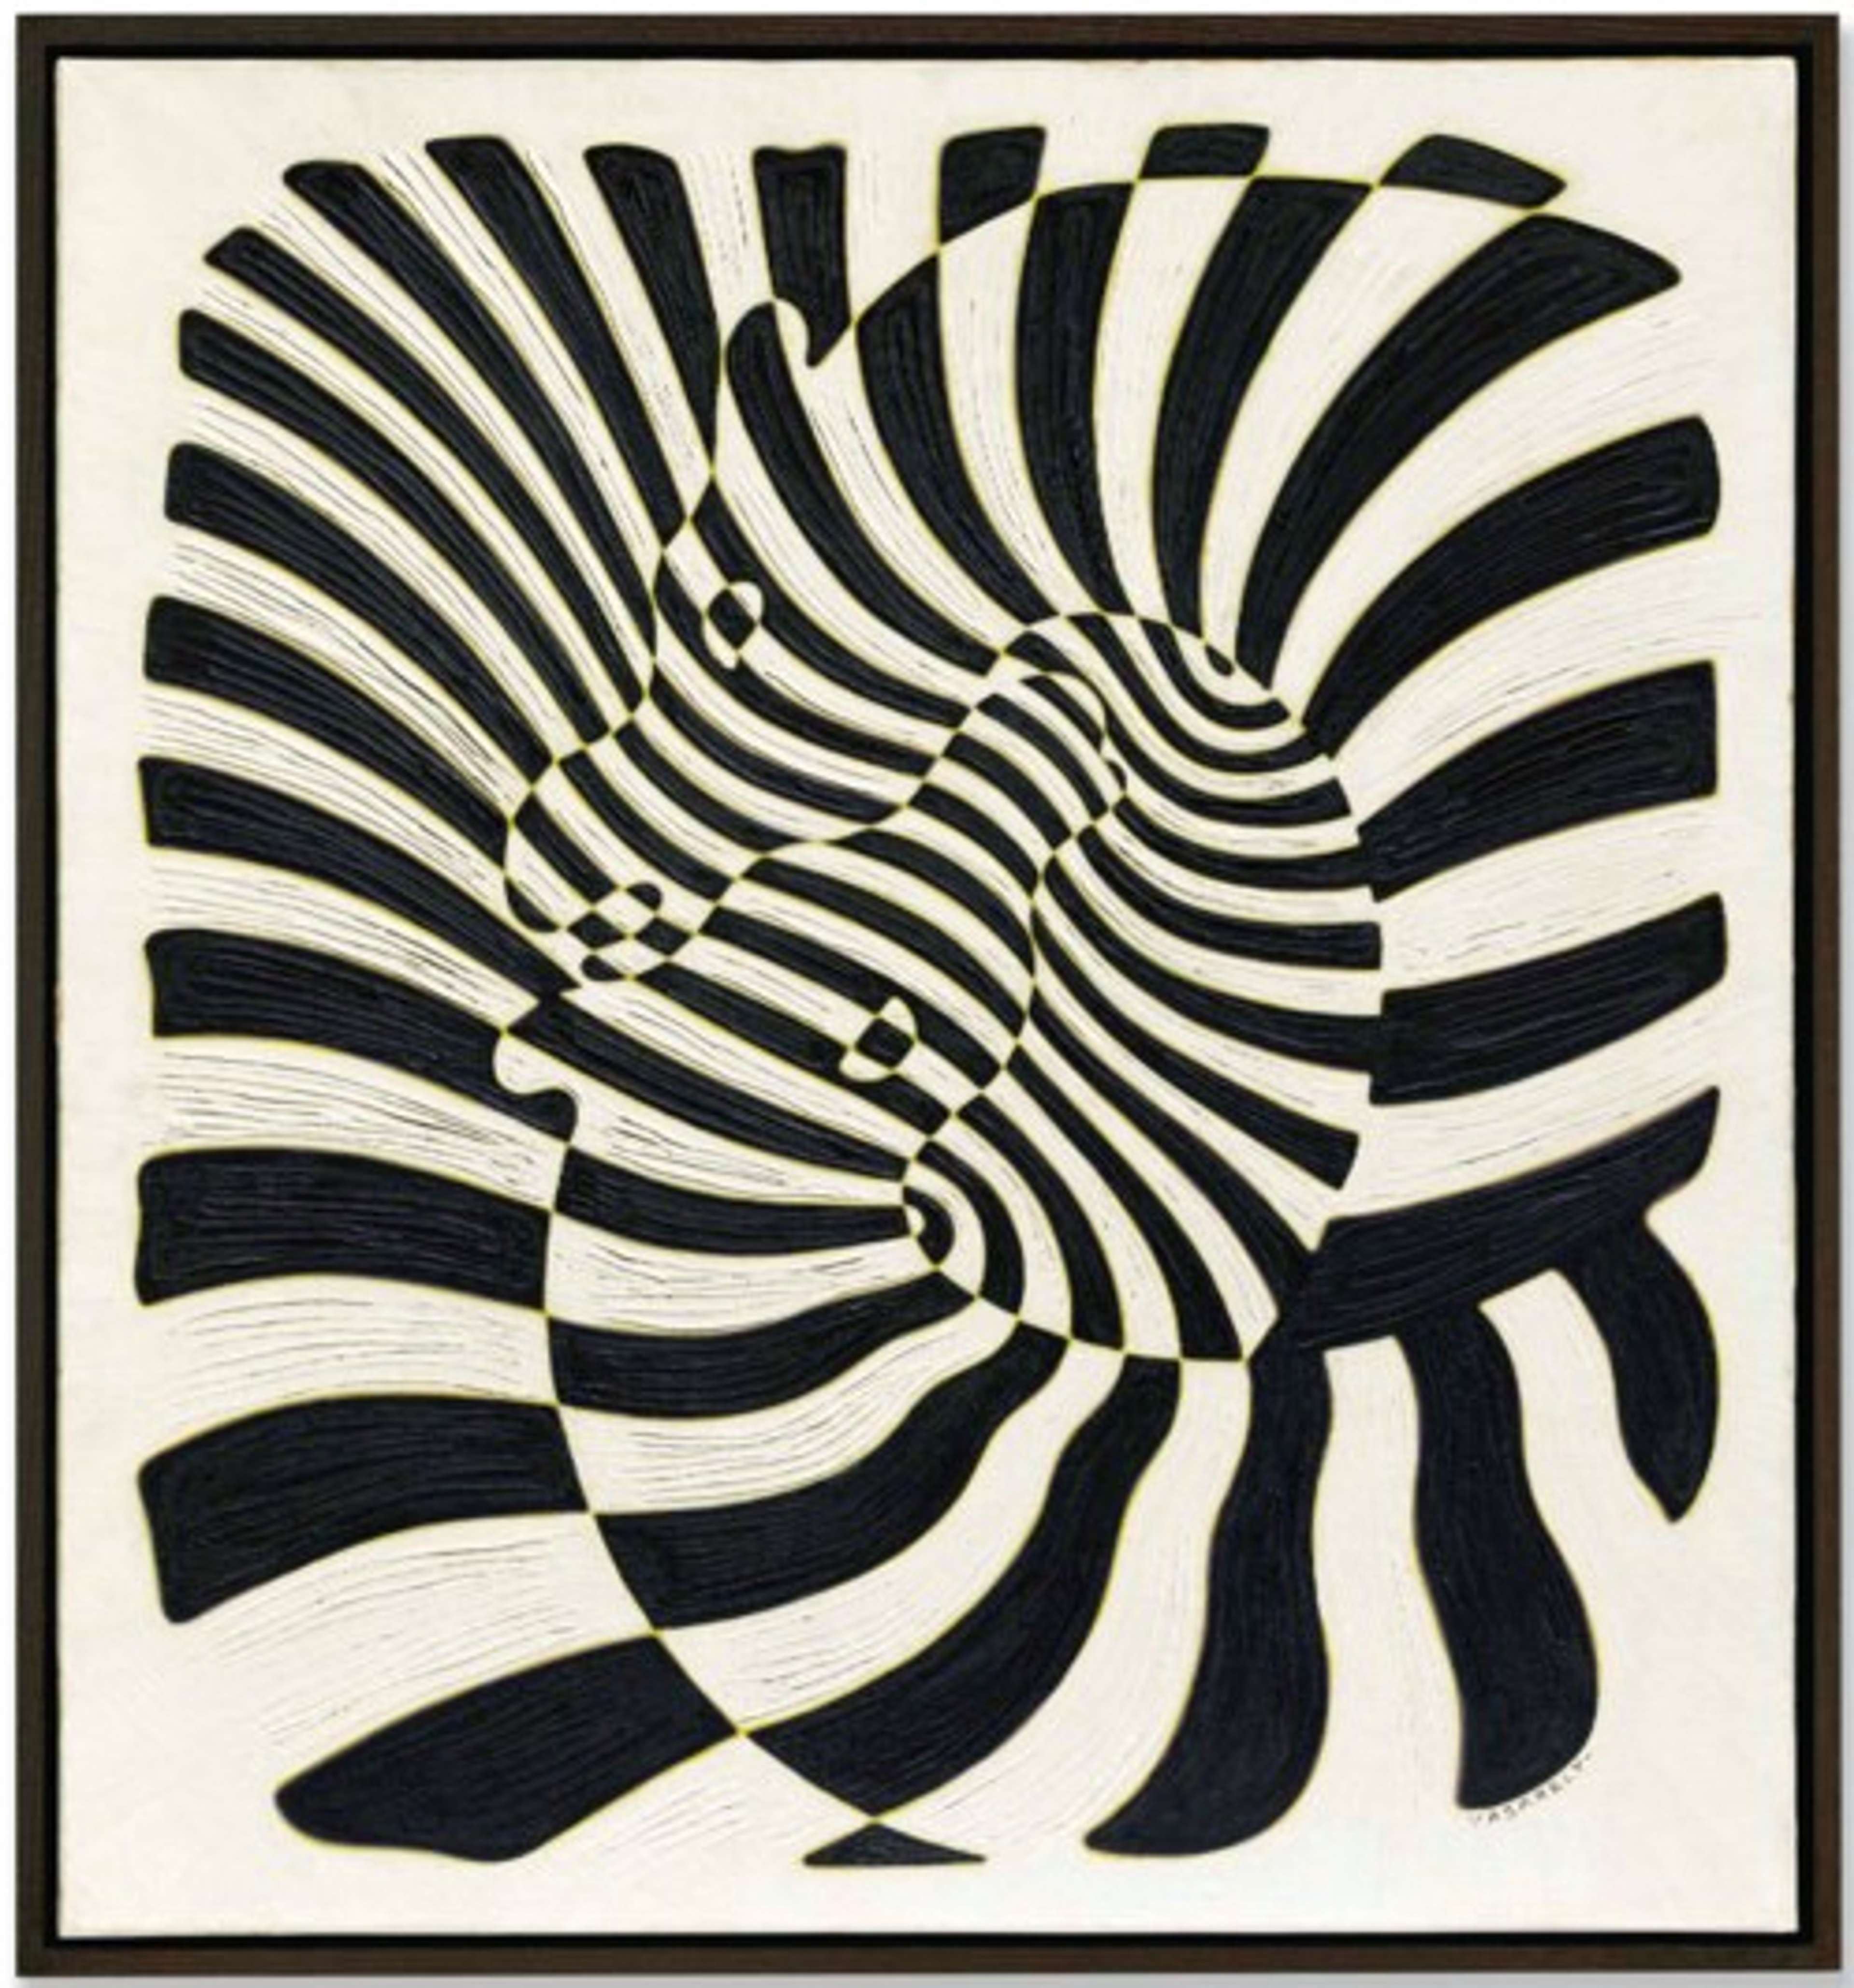 An optical view of two intertwined zebra necks forming an illusion of striped patterns. The zebras' heads emerge, revealing their camouflaged facial features.